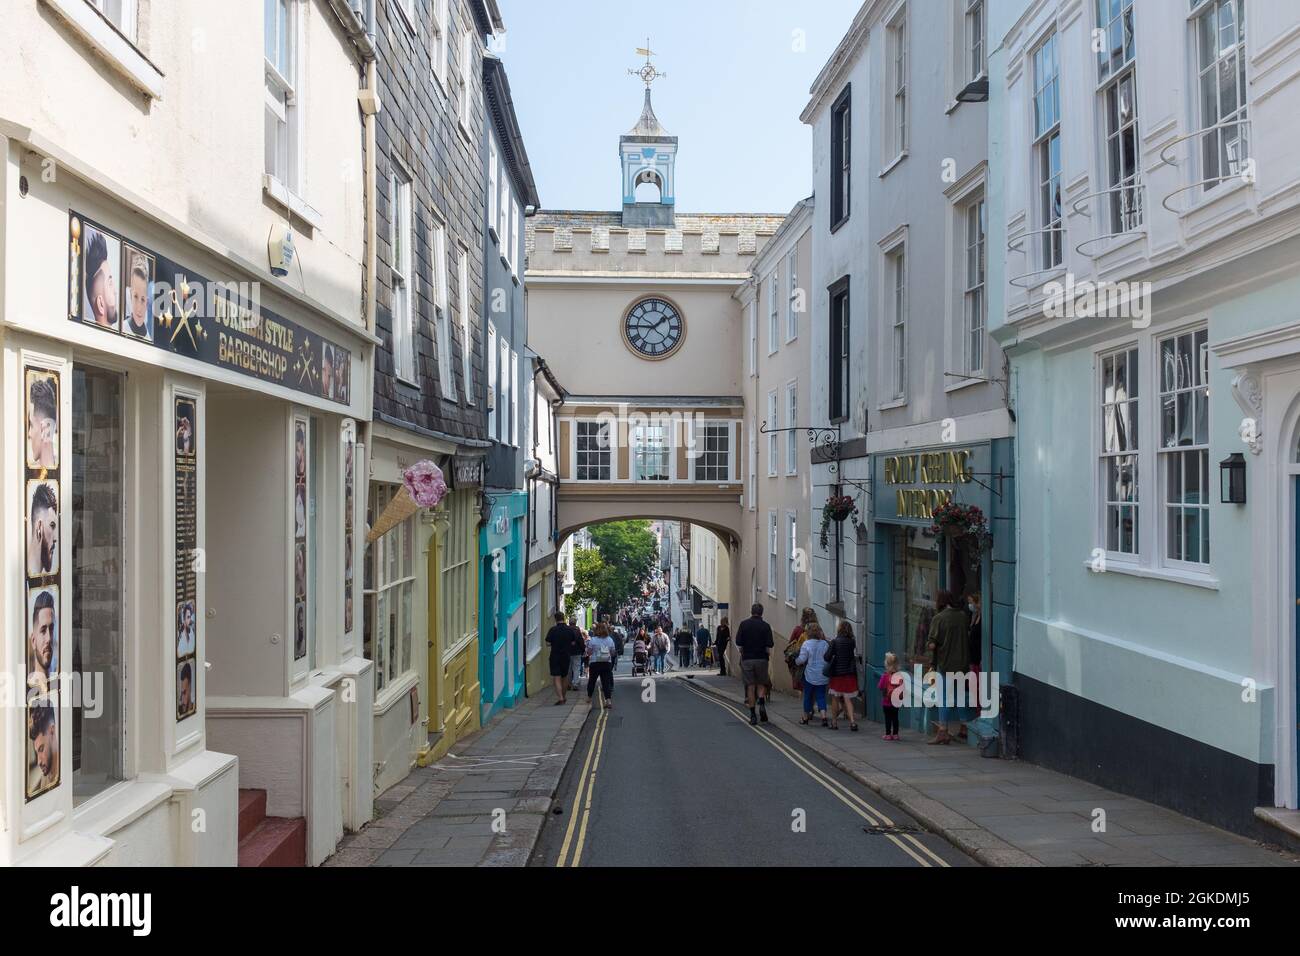 East Gate Tudor arch and clock tower over Totnes High Street, Devon was once the entrance to the medieval town Stock Photo